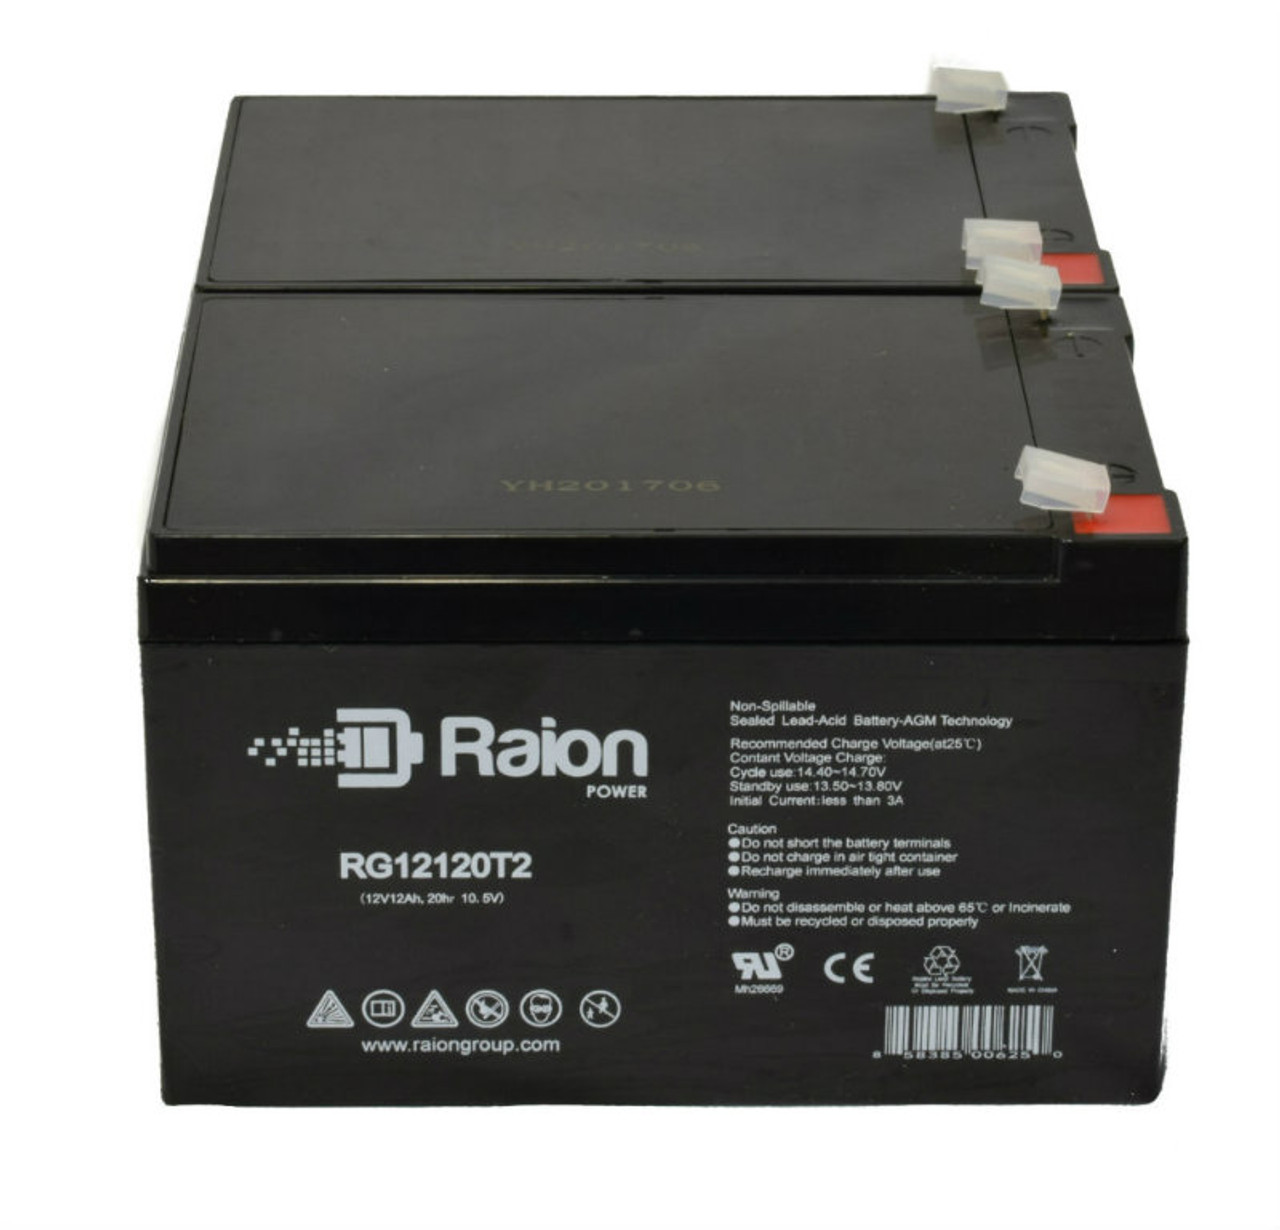 Raion Power 12V 12Ah Non-Spillable Compatible Replacement Battery for Yucel Y12-12 - (2 Pack)